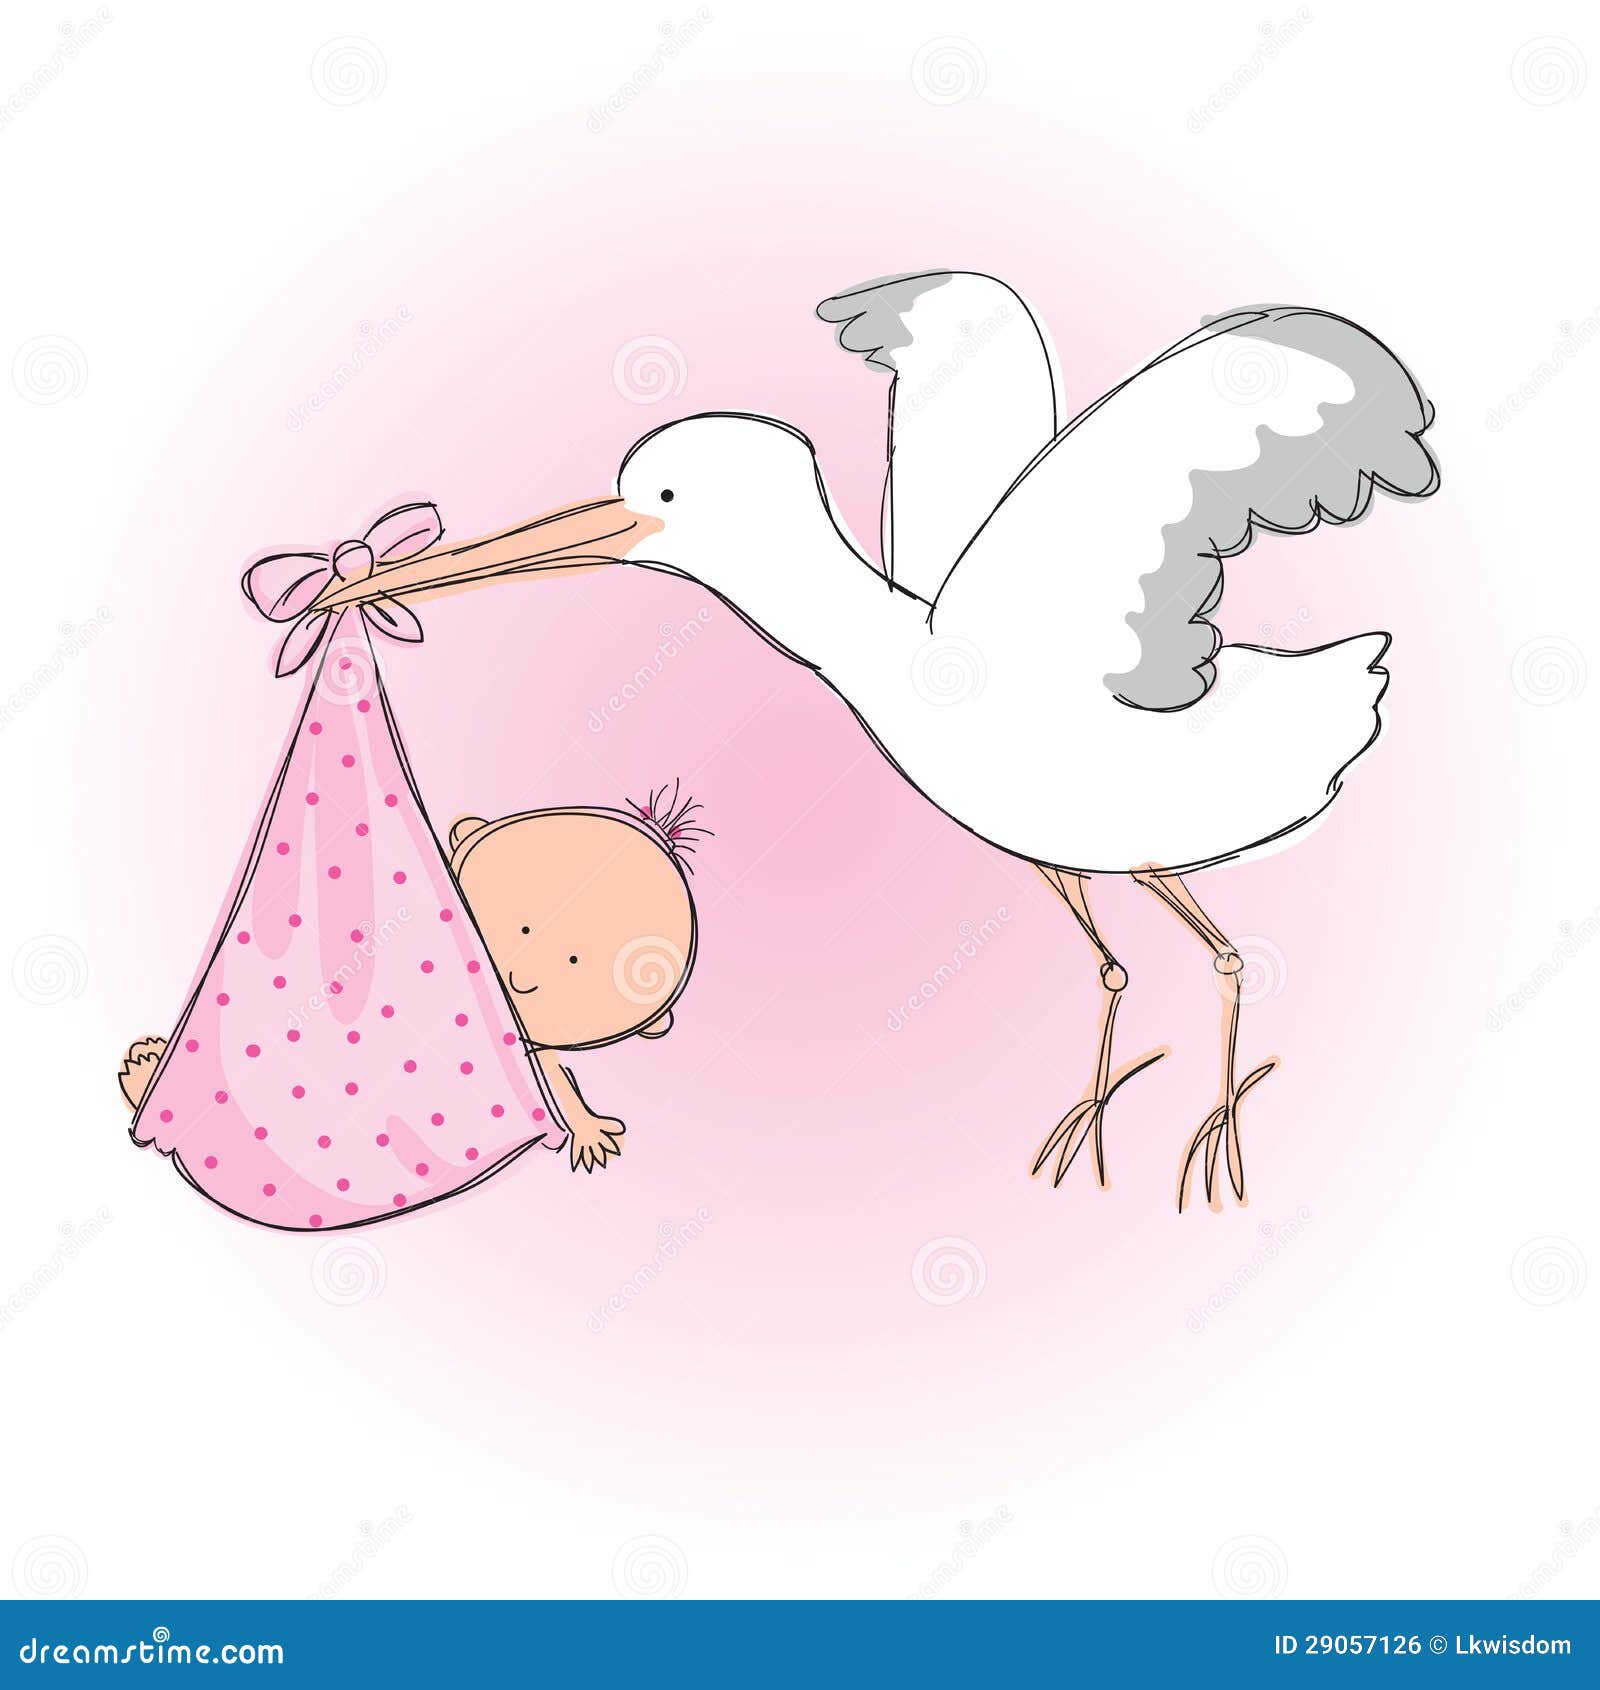 delivery stork clipart - photo #48